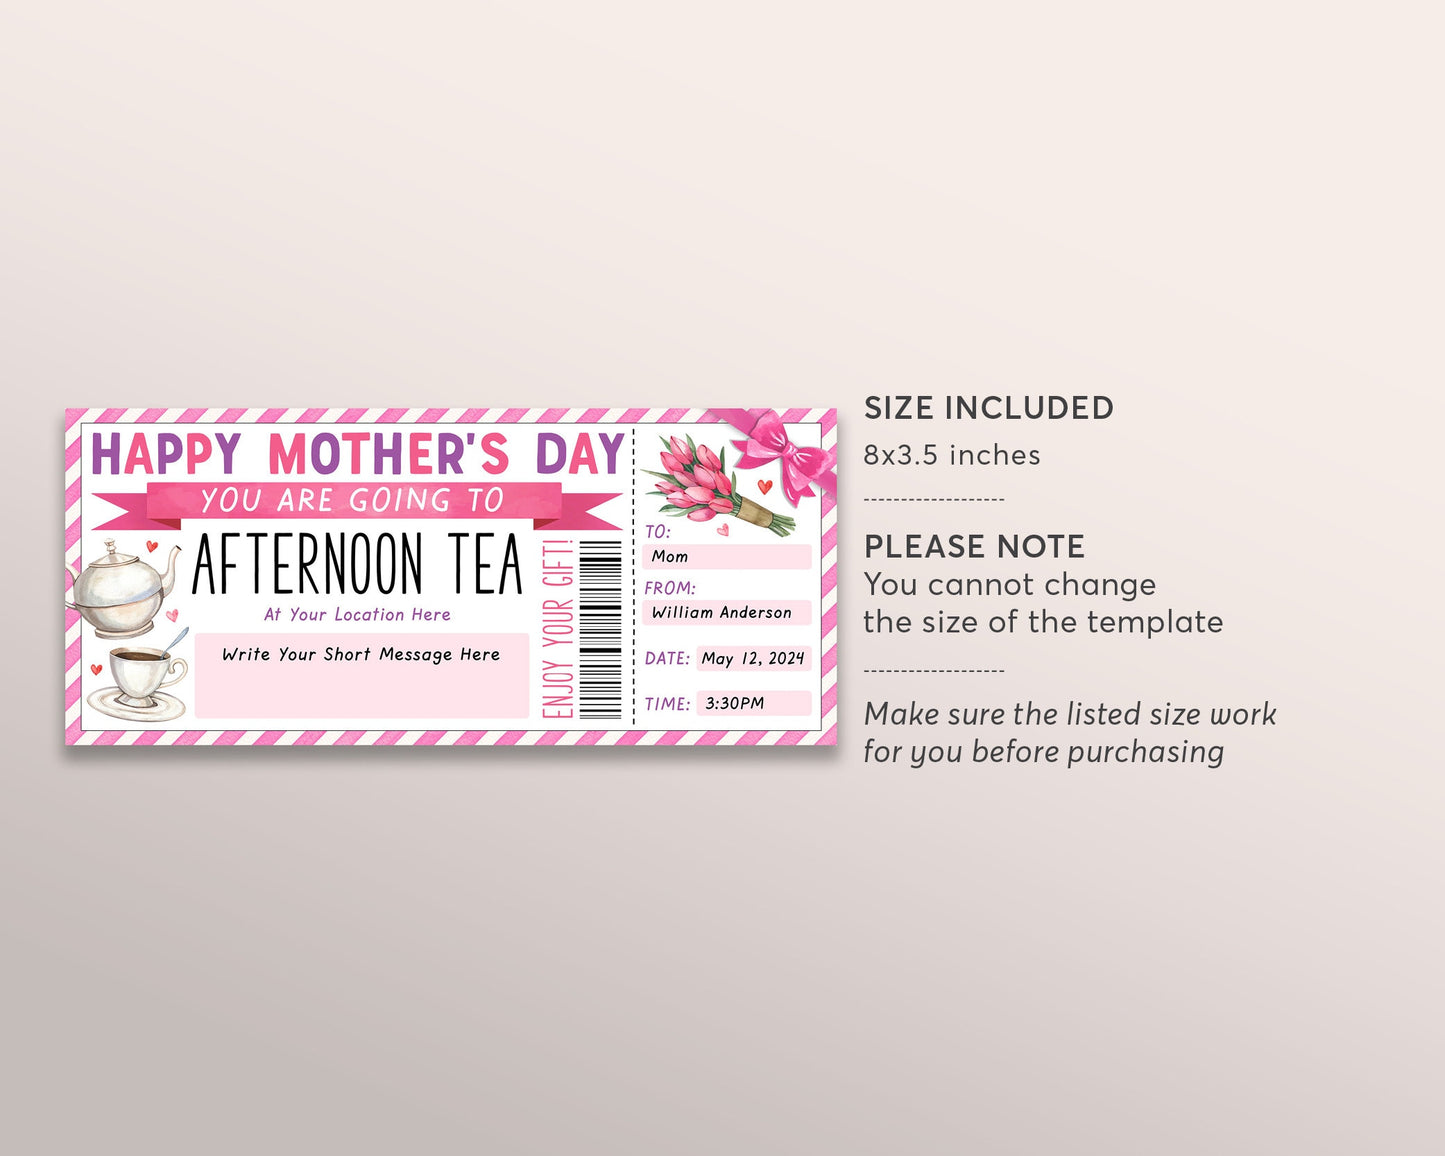 Afternoon Tea Gift Voucher Ticket Editable Template, Mothers Day English Afternoon Tea Gift Certificate Coupon For Mom, Hotel High Tea